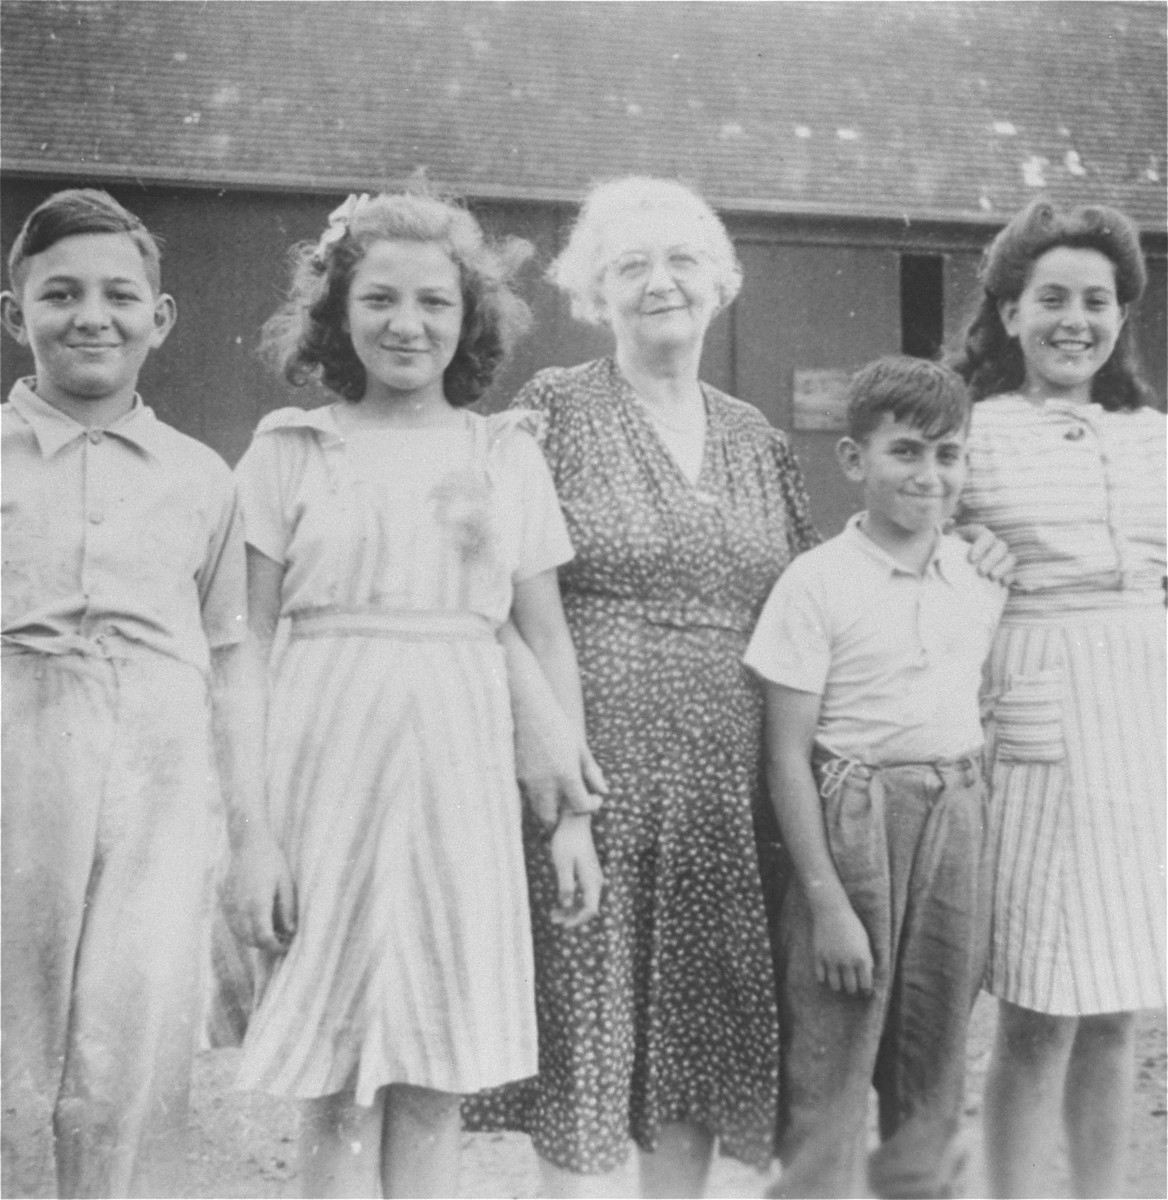 Group portrait of the Muller cousins on their farm in southern Ontario.

Pictured at the left are Henry and Alice Muller, and at the right, Agnes and George Muller.